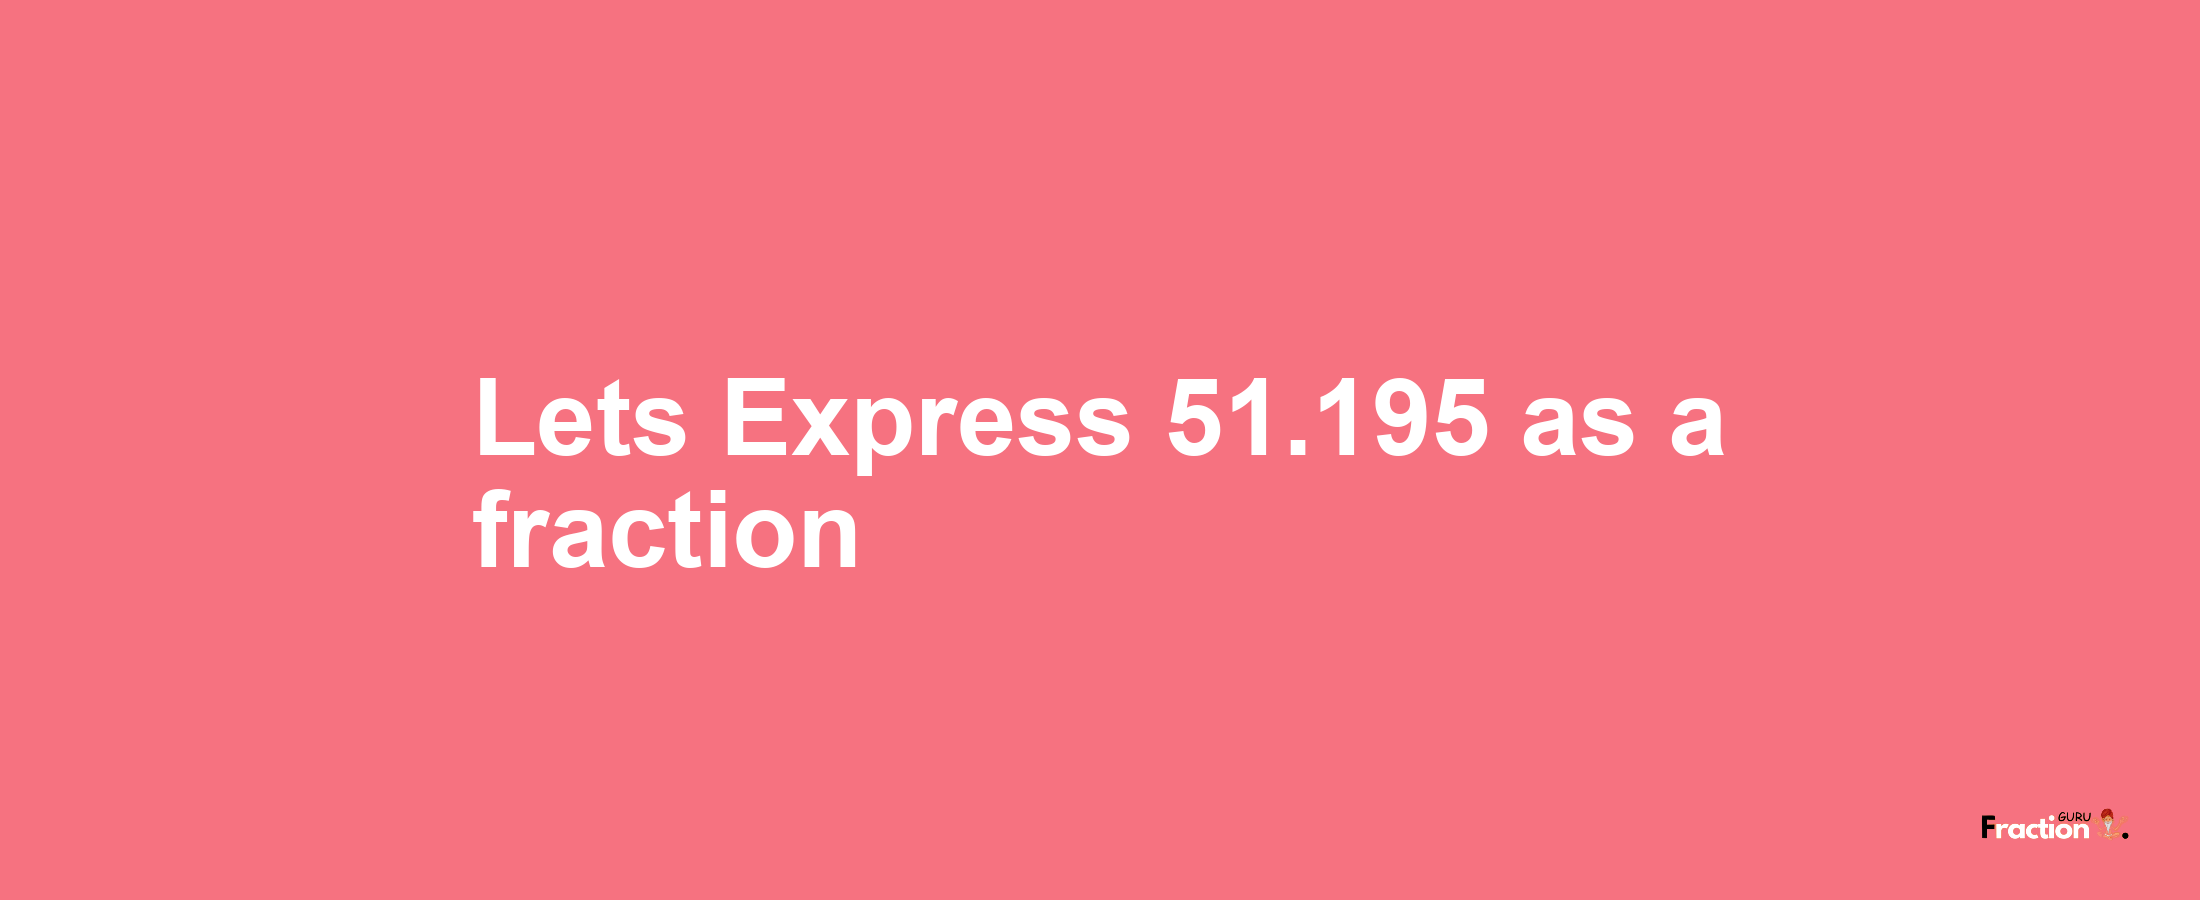 Lets Express 51.195 as afraction